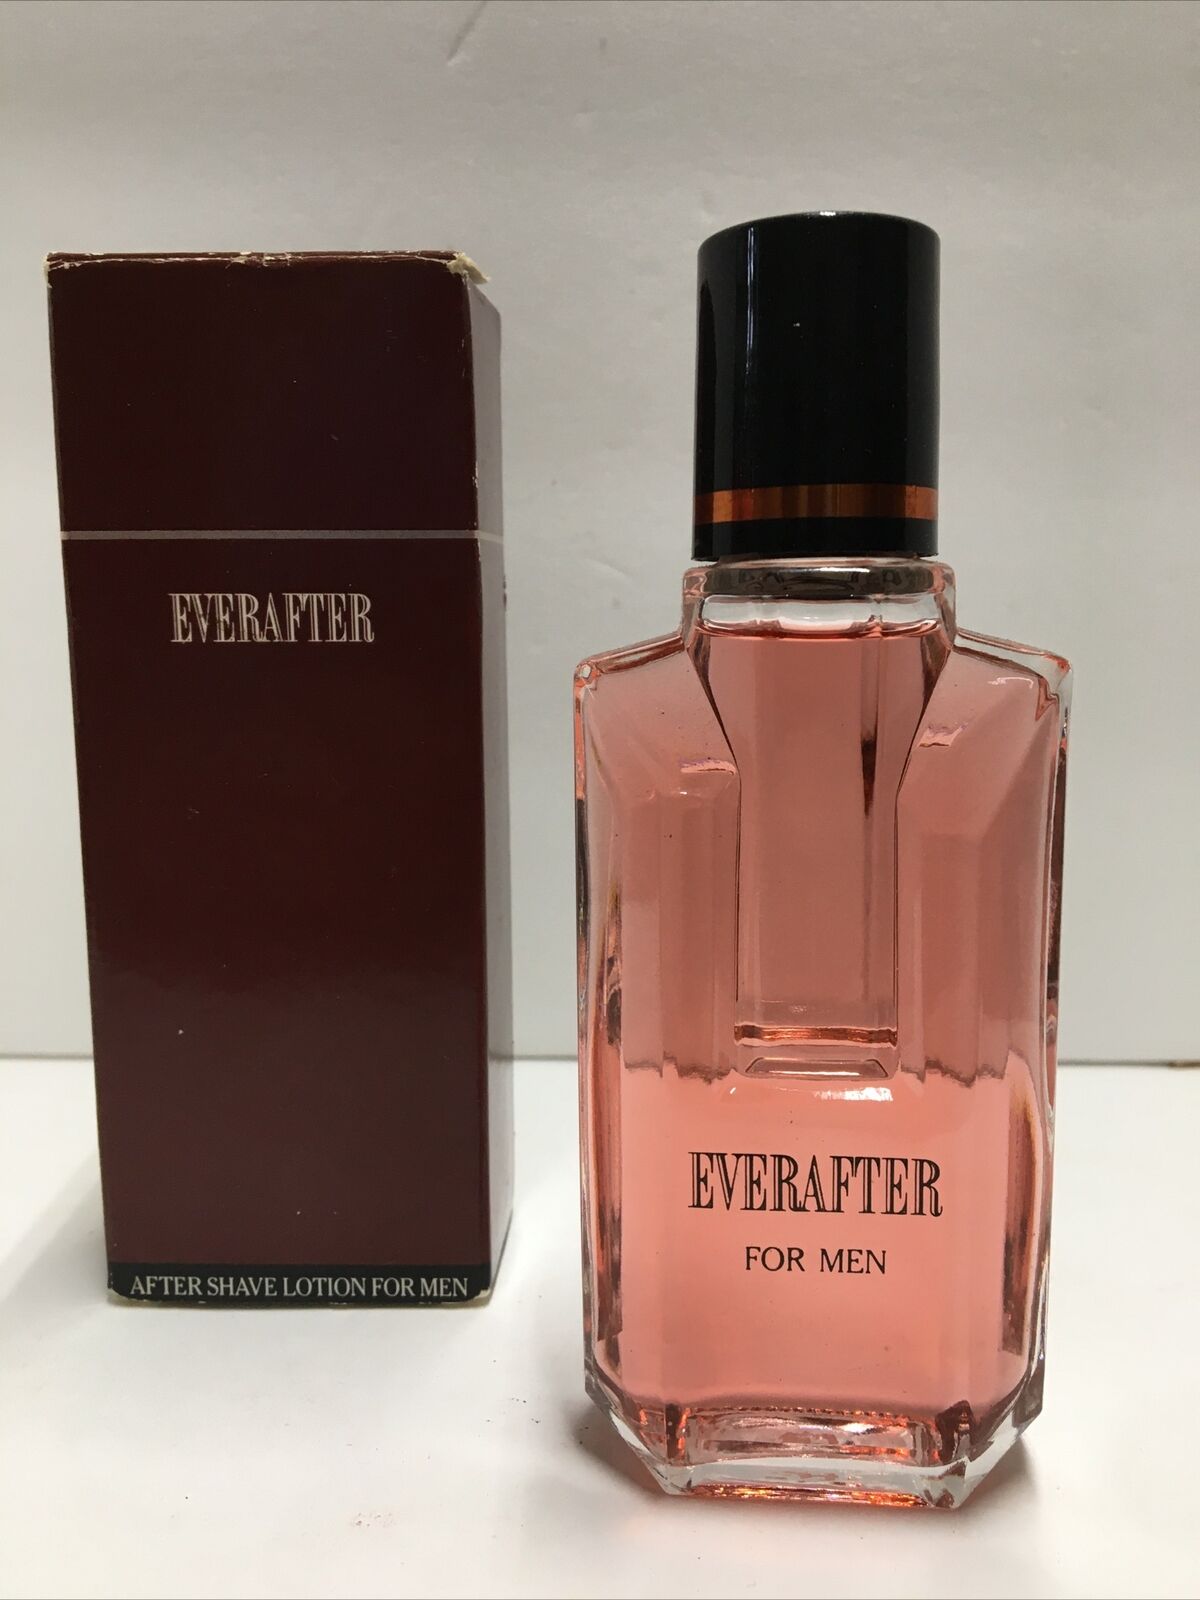 Everafter By Avon Aftershave Lotion for Men 3 fl oz. (1990 Version)